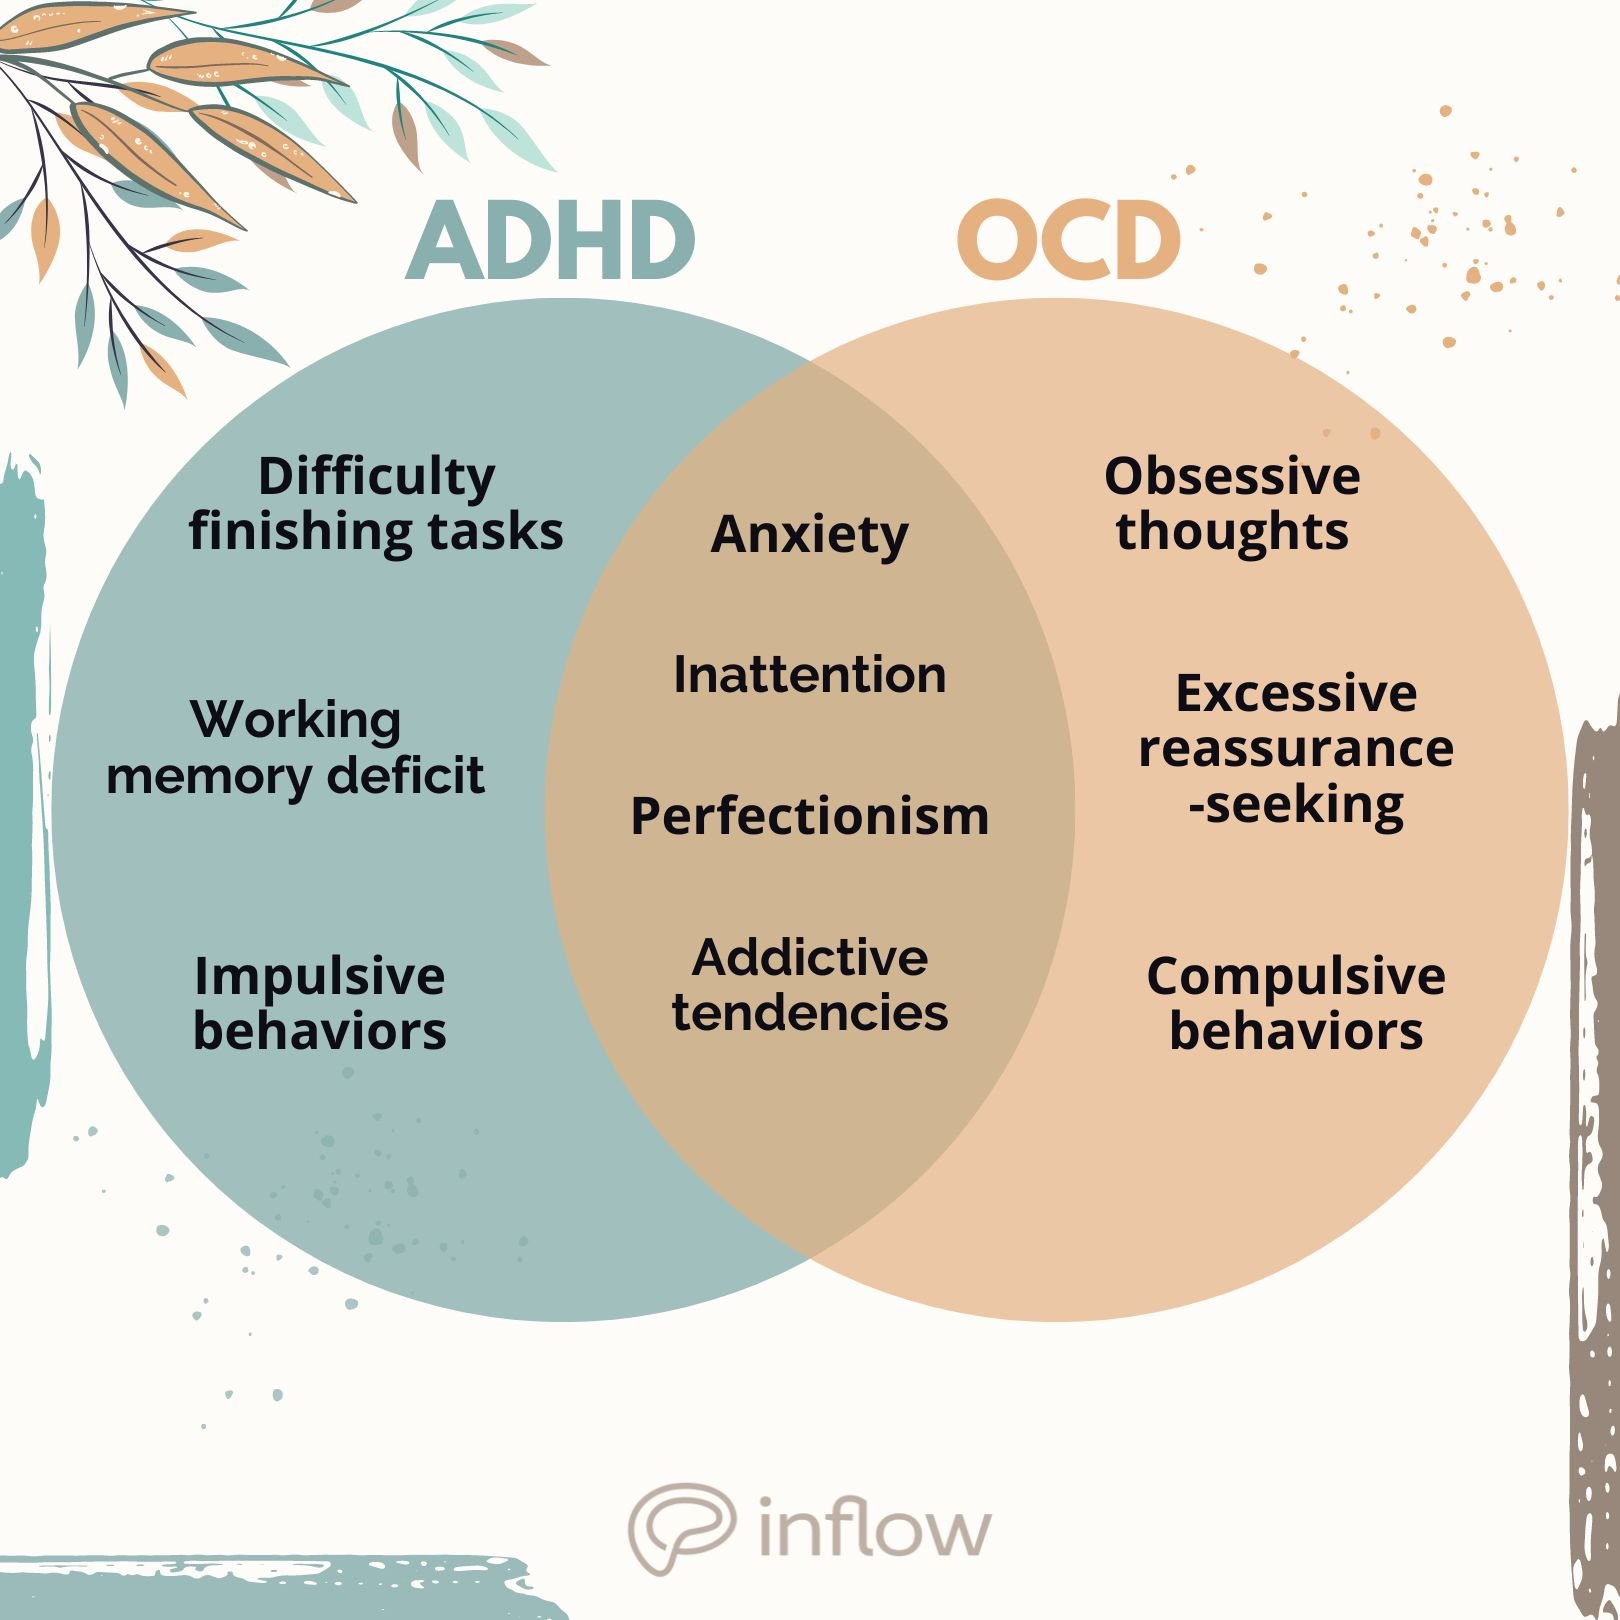 adhd vs ocd venn diagram. ADHD only: difficulty finishing tasks, working memory deficit, impulsive behaviors. OCD only: obsessive thoughts, excessive reassurance seeking, compulsive behaviors. In the middle: anxiety, inattention, perfectionism, addictive tendencies